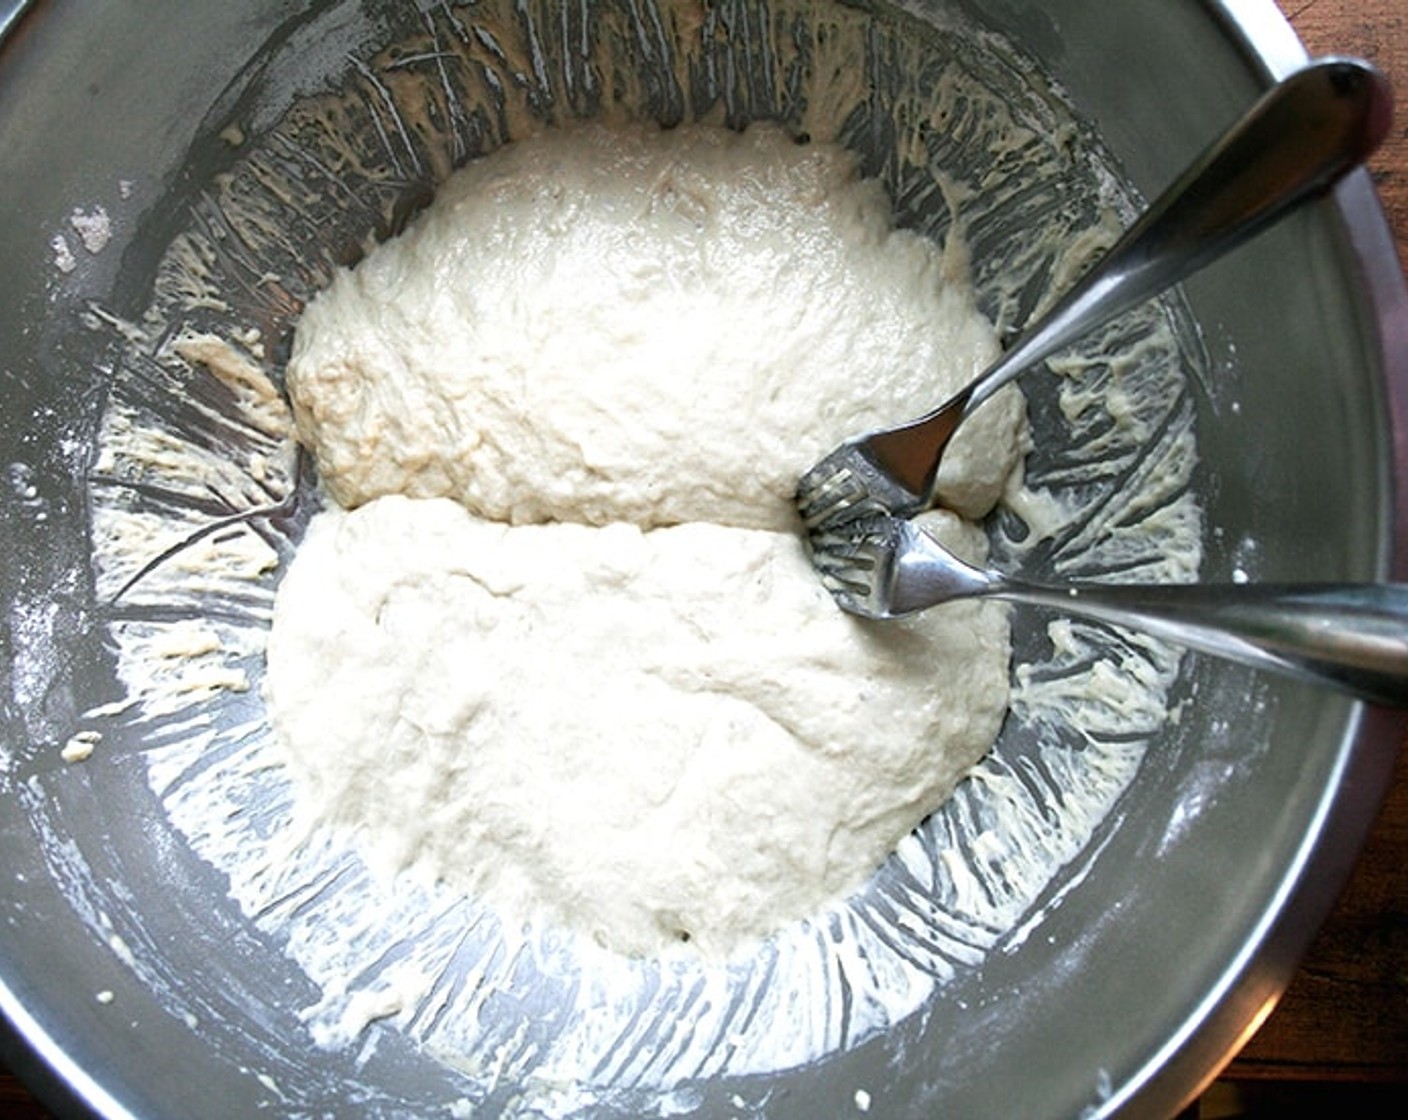 step 7 Then, take your two forks and divide the dough into two equal portions. To do so, eye the center of the mass of dough, and starting from the center and working out, pull the dough apart with the two forks. Scoop up each half and place into your prepared bowls.